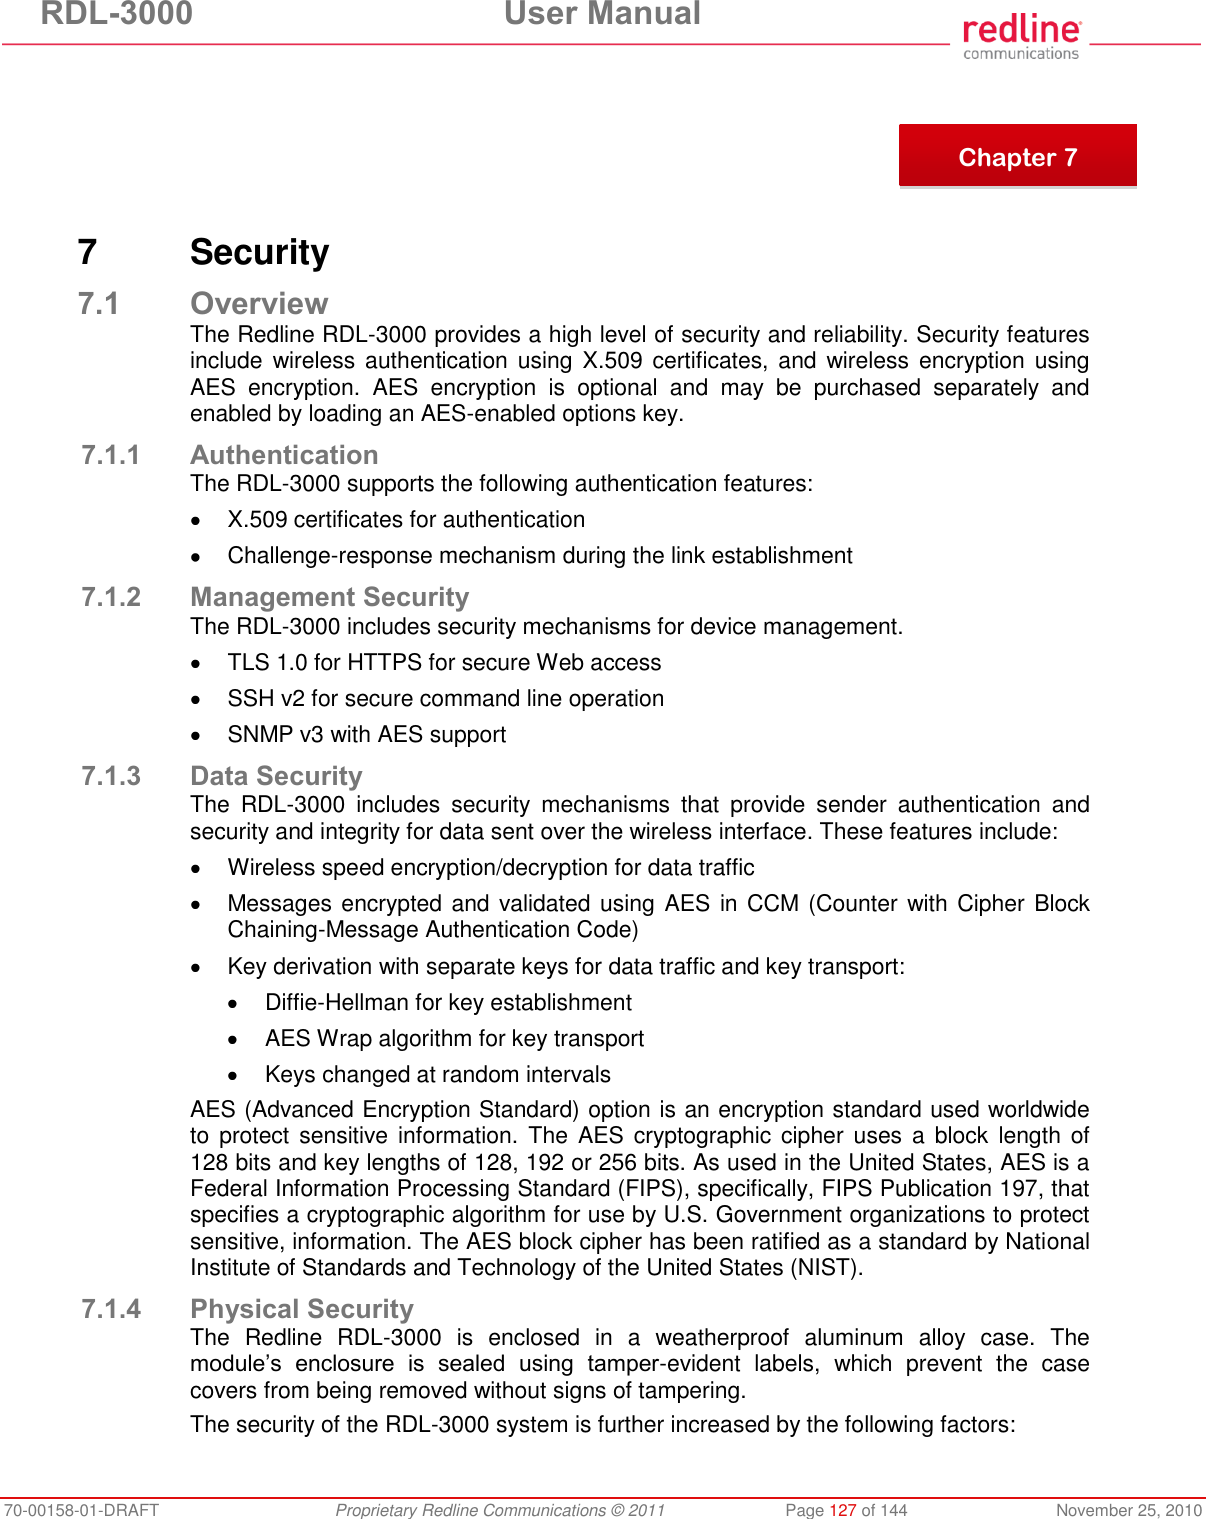 RDL-3000  User Manual 70-00158-01-DRAFT  Proprietary Redline Communications © 2011  Page 127 of 144  November 25, 2010        7  Security 7.1 Overview The Redline RDL-3000 provides a high level of security and reliability. Security features include wireless authentication  using  X.509 certificates,  and  wireless encryption using AES  encryption.  AES  encryption  is  optional  and  may  be  purchased  separately  and enabled by loading an AES-enabled options key. 7.1.1 Authentication The RDL-3000 supports the following authentication features:   X.509 certificates for authentication   Challenge-response mechanism during the link establishment 7.1.2 Management Security The RDL-3000 includes security mechanisms for device management.   TLS 1.0 for HTTPS for secure Web access   SSH v2 for secure command line operation   SNMP v3 with AES support 7.1.3 Data Security The  RDL-3000  includes  security  mechanisms  that  provide  sender  authentication  and security and integrity for data sent over the wireless interface. These features include:   Wireless speed encryption/decryption for data traffic   Messages encrypted and validated using AES in CCM (Counter with Cipher Block Chaining-Message Authentication Code)   Key derivation with separate keys for data traffic and key transport:   Diffie-Hellman for key establishment   AES Wrap algorithm for key transport   Keys changed at random intervals AES (Advanced Encryption Standard) option is an encryption standard used worldwide to  protect  sensitive information.  The AES cryptographic cipher  uses a  block  length of 128 bits and key lengths of 128, 192 or 256 bits. As used in the United States, AES is a Federal Information Processing Standard (FIPS), specifically, FIPS Publication 197, that specifies a cryptographic algorithm for use by U.S. Government organizations to protect sensitive, information. The AES block cipher has been ratified as a standard by National Institute of Standards and Technology of the United States (NIST). 7.1.4 Physical Security The  Redline  RDL-3000  is  enclosed  in  a  weatherproof  aluminum  alloy  case.  The module’s  enclosure  is  sealed  using  tamper-evident  labels,  which  prevent  the  case covers from being removed without signs of tampering.   The security of the RDL-3000 system is further increased by the following factors:  Chapter 7 